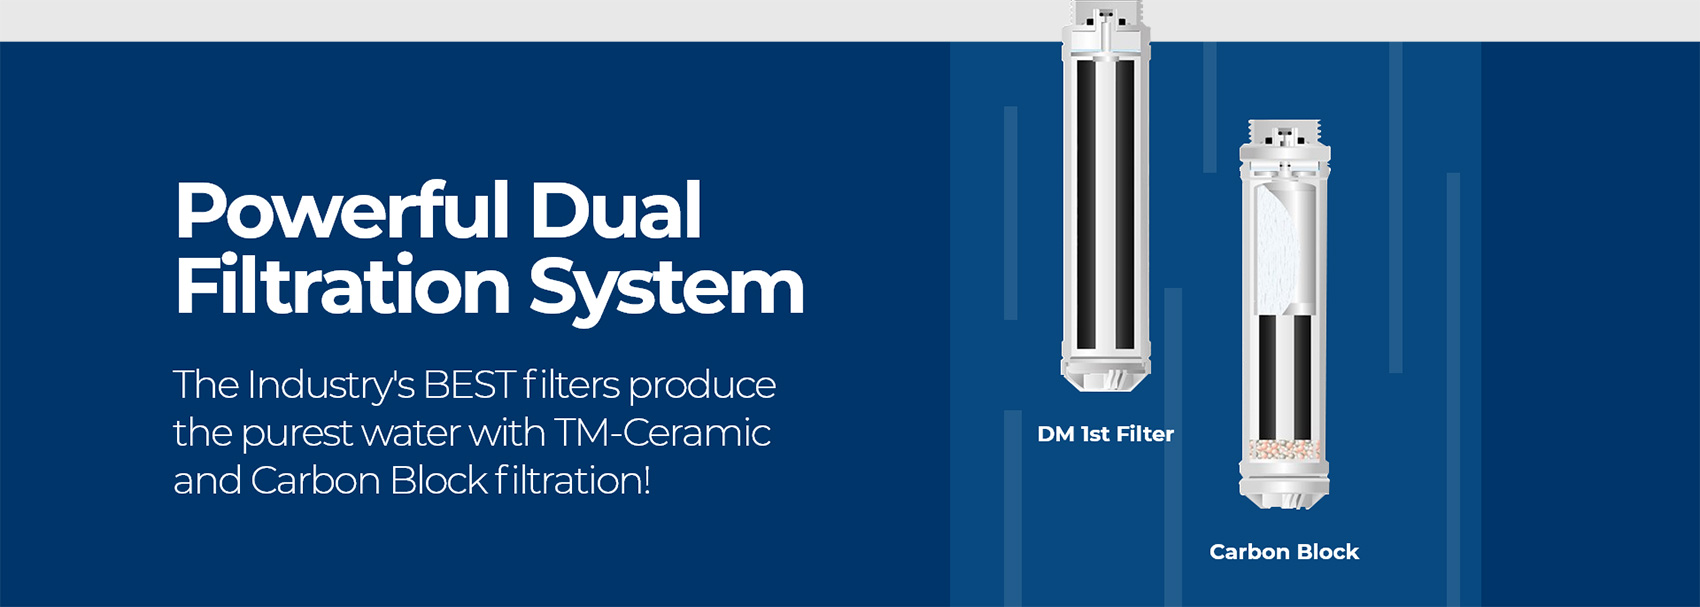 Powerful Dual Filtration System!